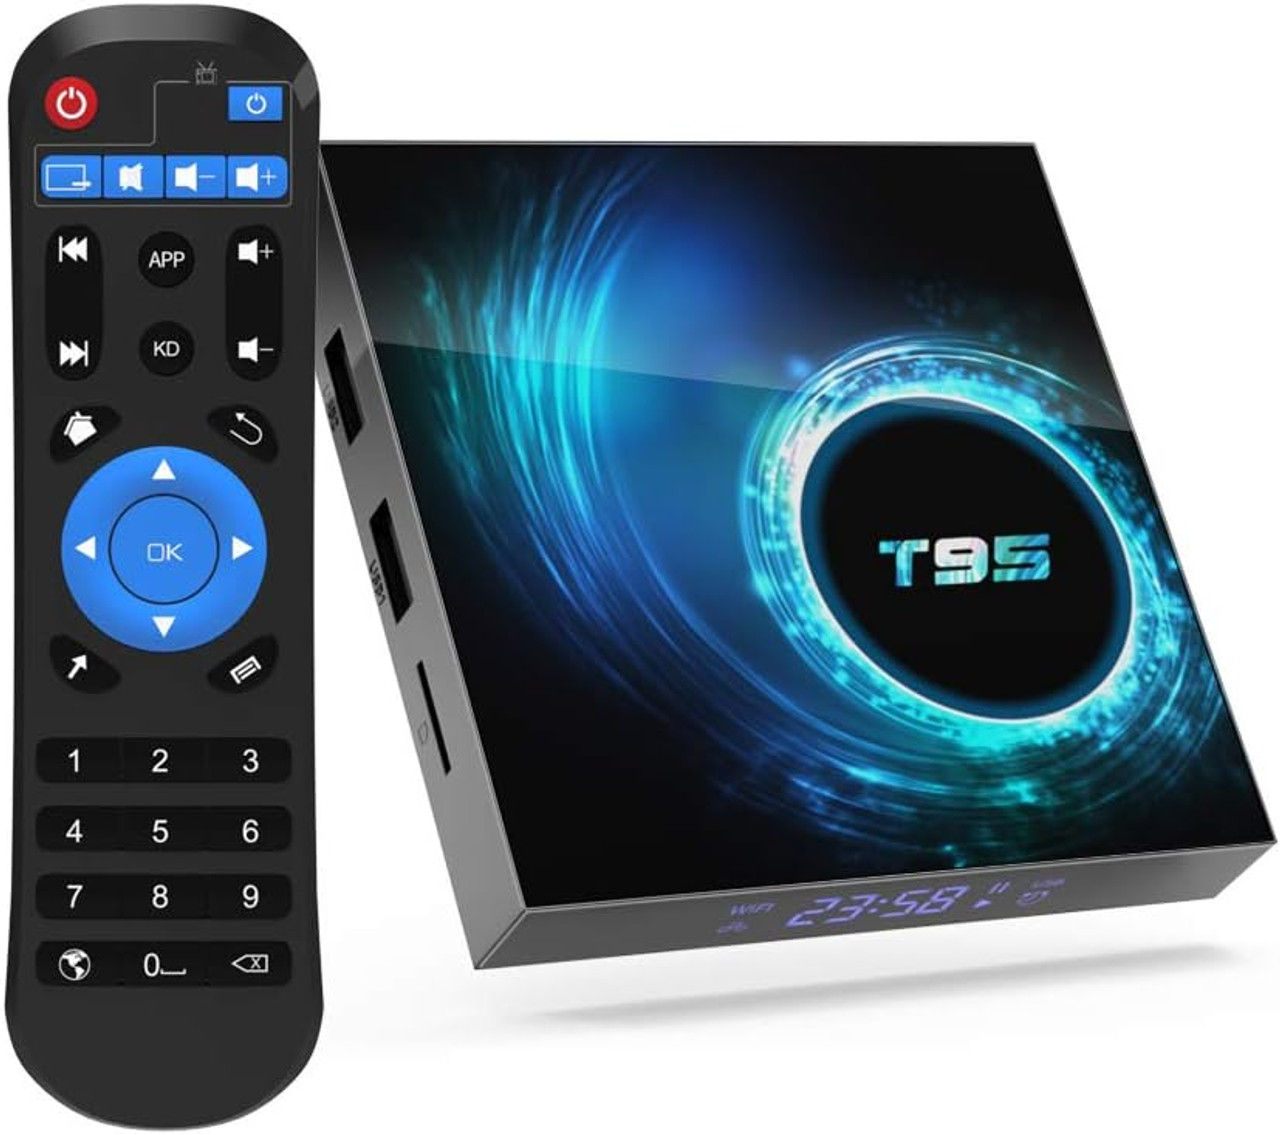 Yagala T95 Android 10.0 TV Box, Allwinner H616 Quad-Core 64bit ARM Corter-A53 CPU - [From 108.00 - Choose pk Qty ] - *Ships from Miami